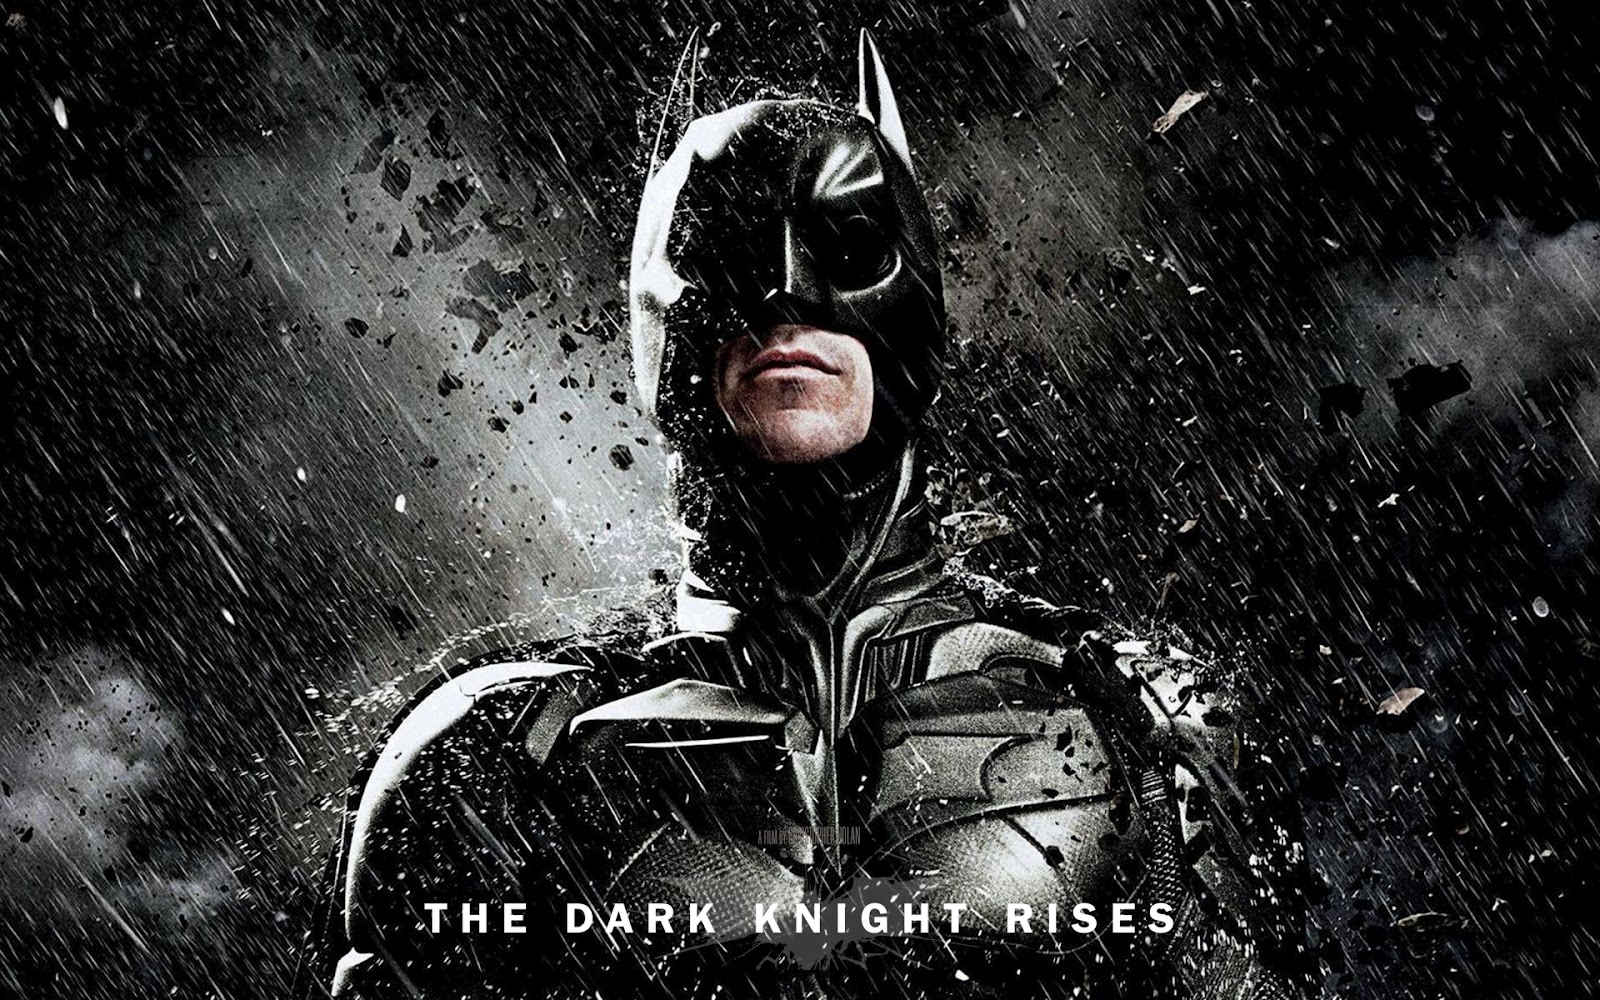 The Dark Knight download the new version for iphone